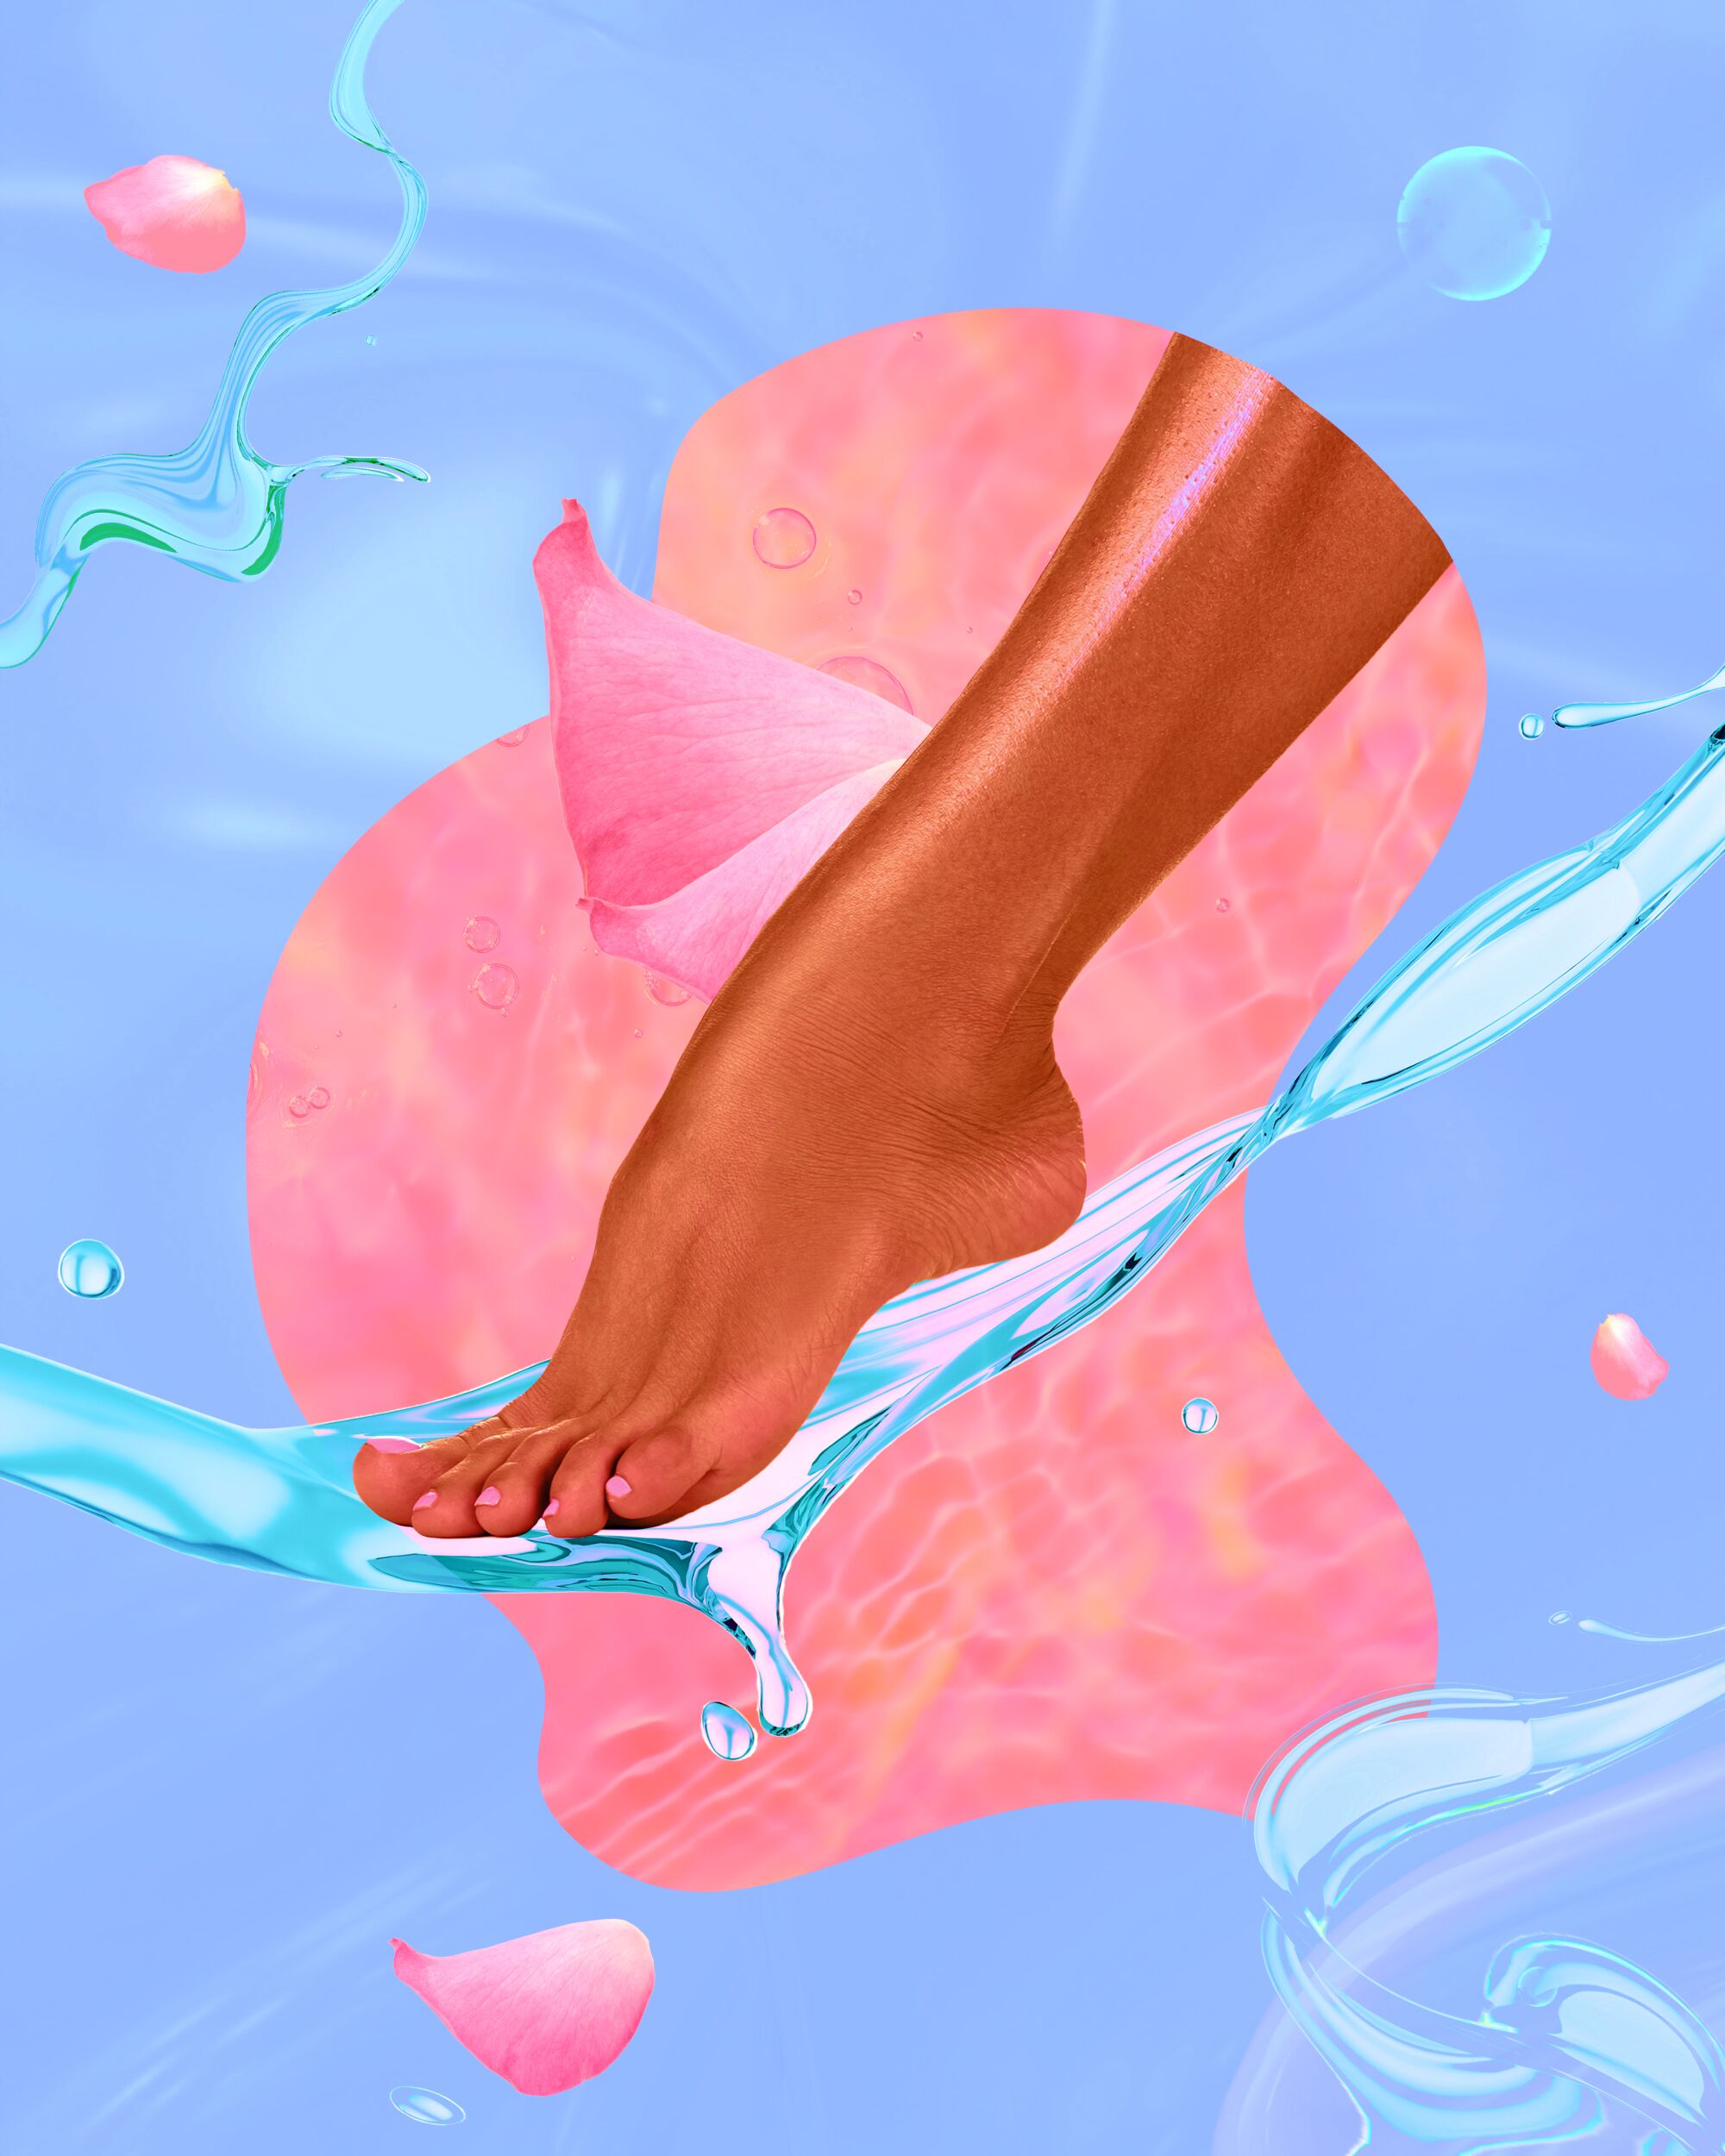 an abstract collage of a brown foot resting on a swirl of water with pink petals and other water swirls surrounding it